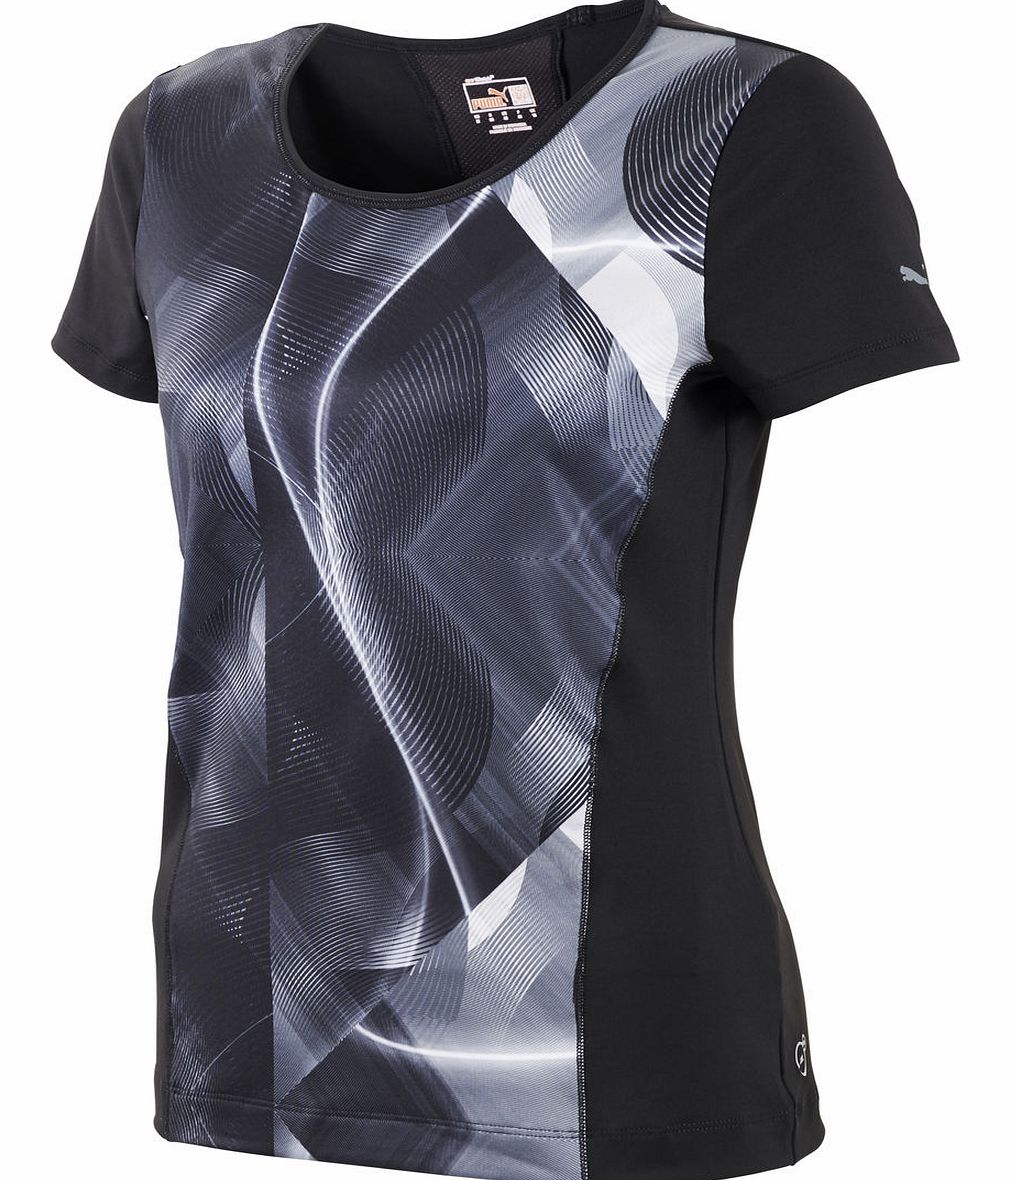 Womans Fitness Graphic T-Shirt - AW14